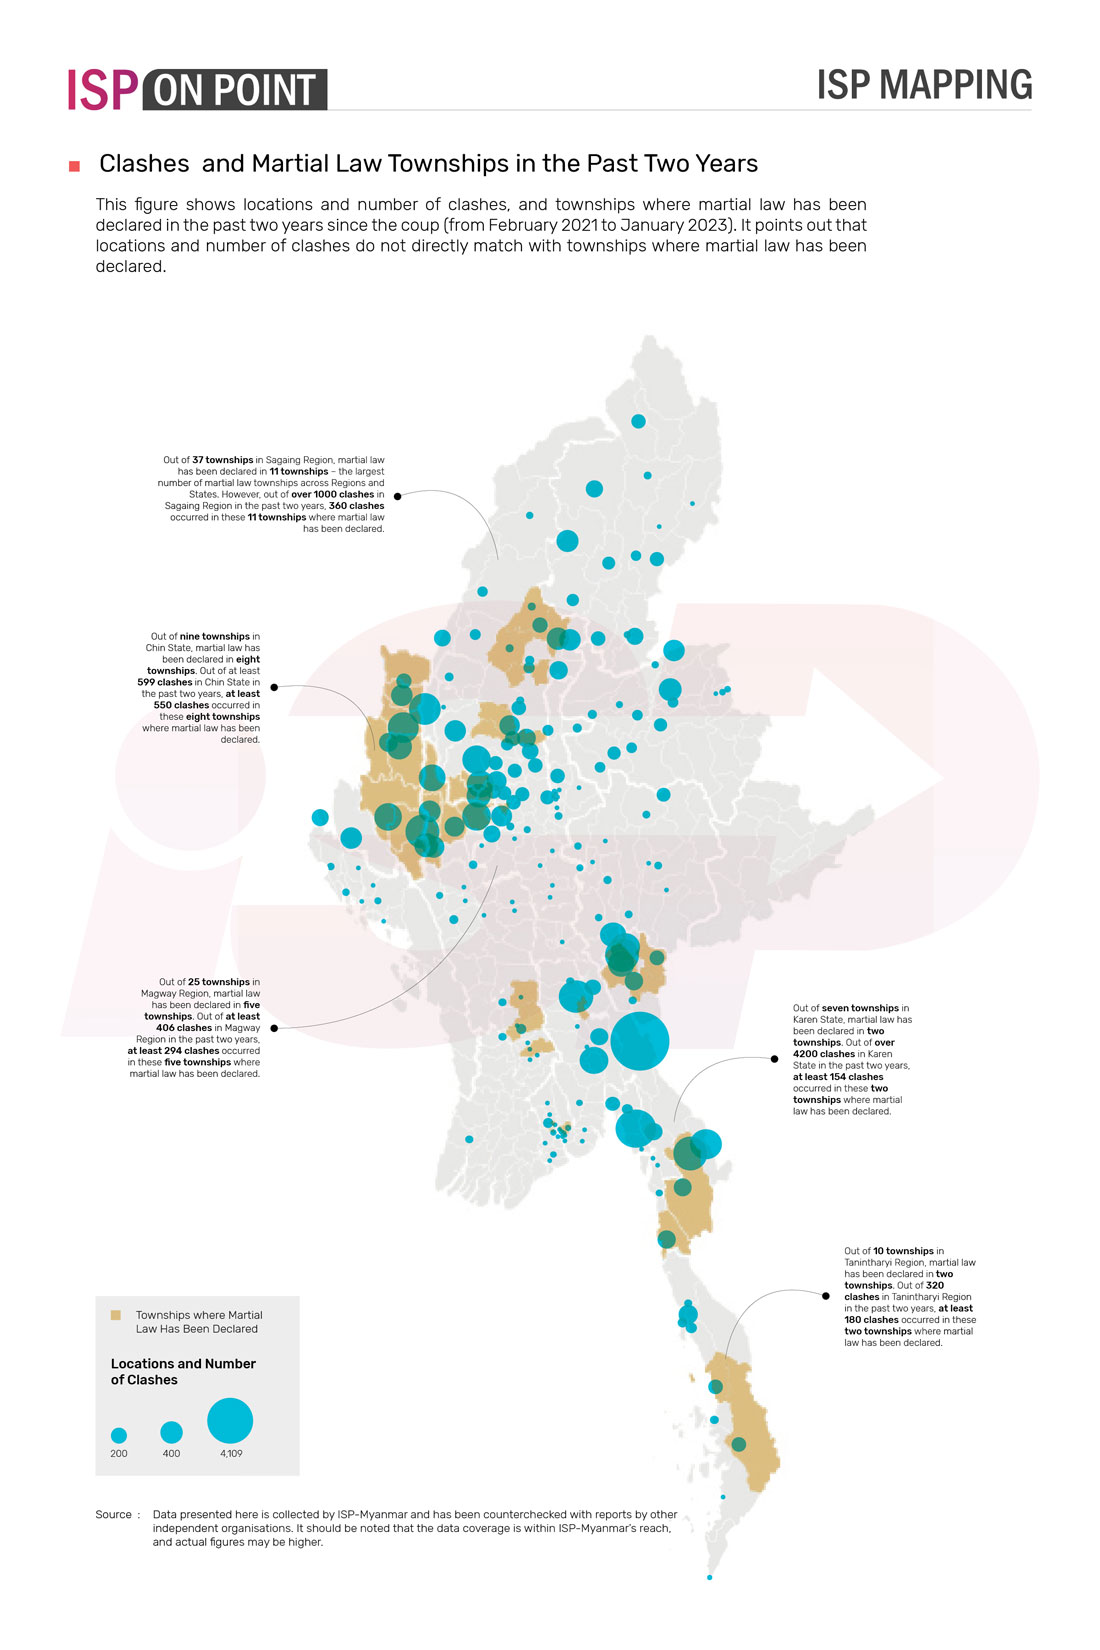 Clashes  and Martial Law Townships in the Past Two Years